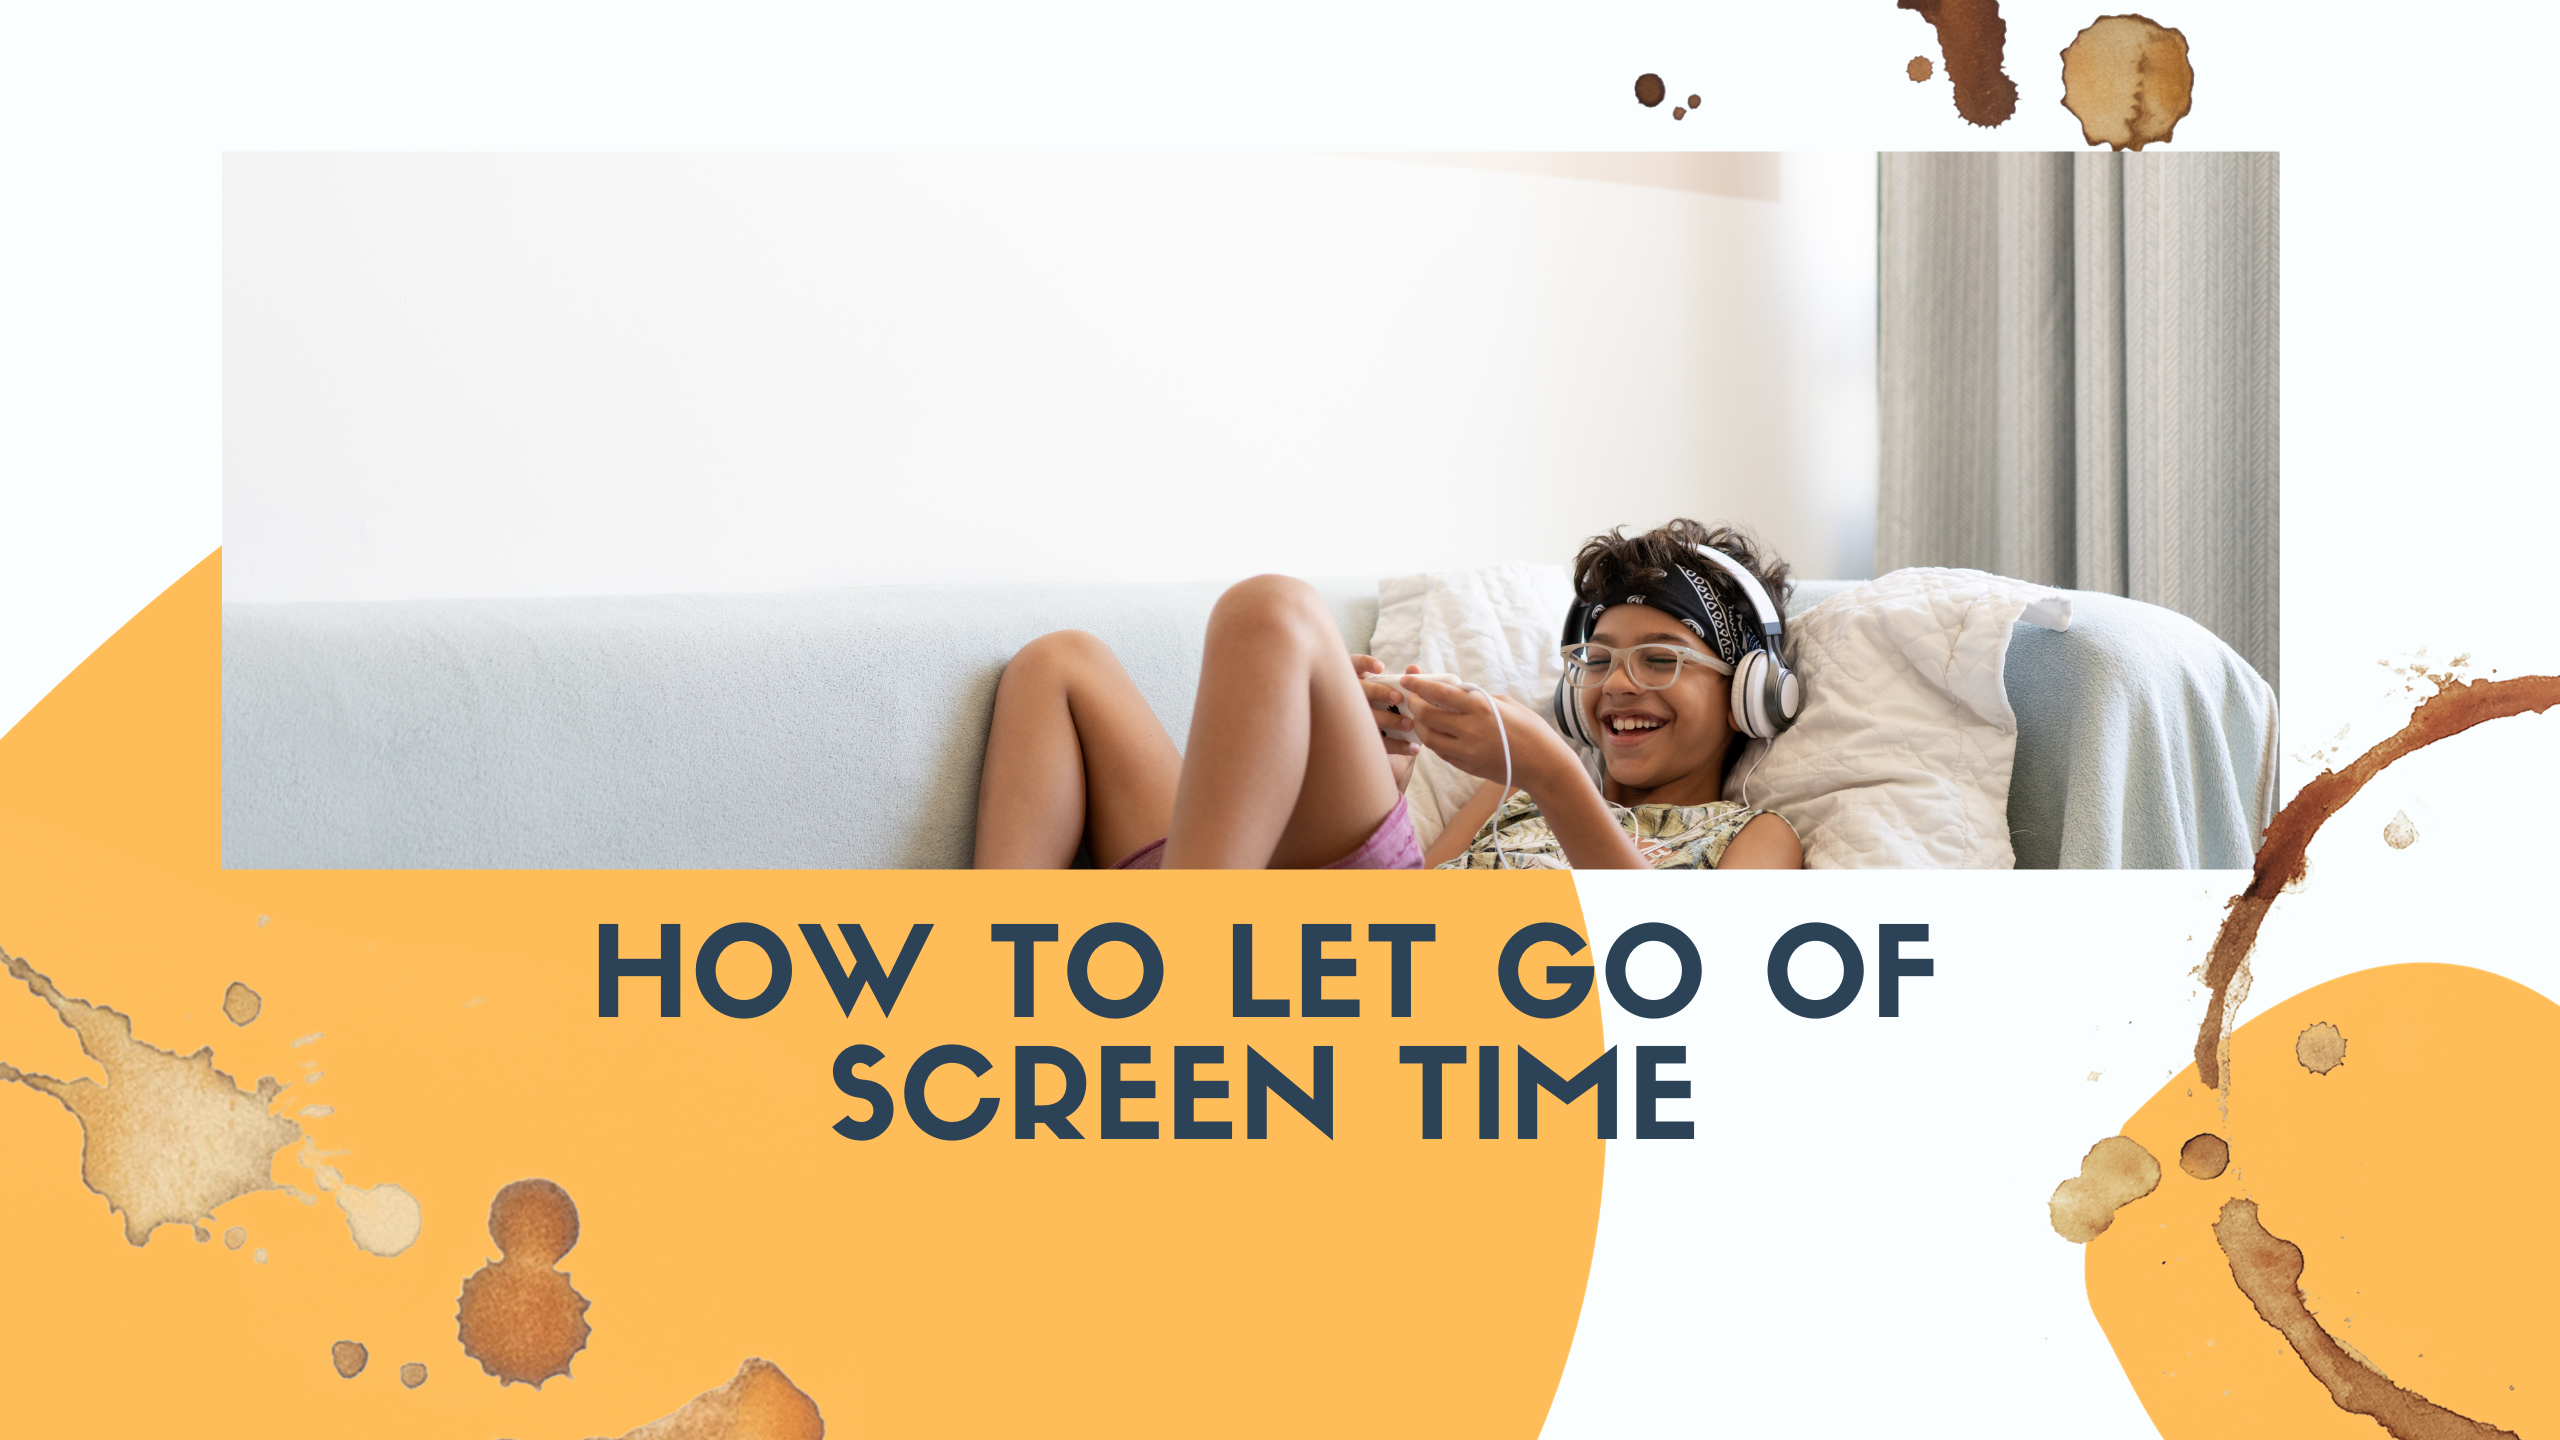 How to Let Go of Screen Time